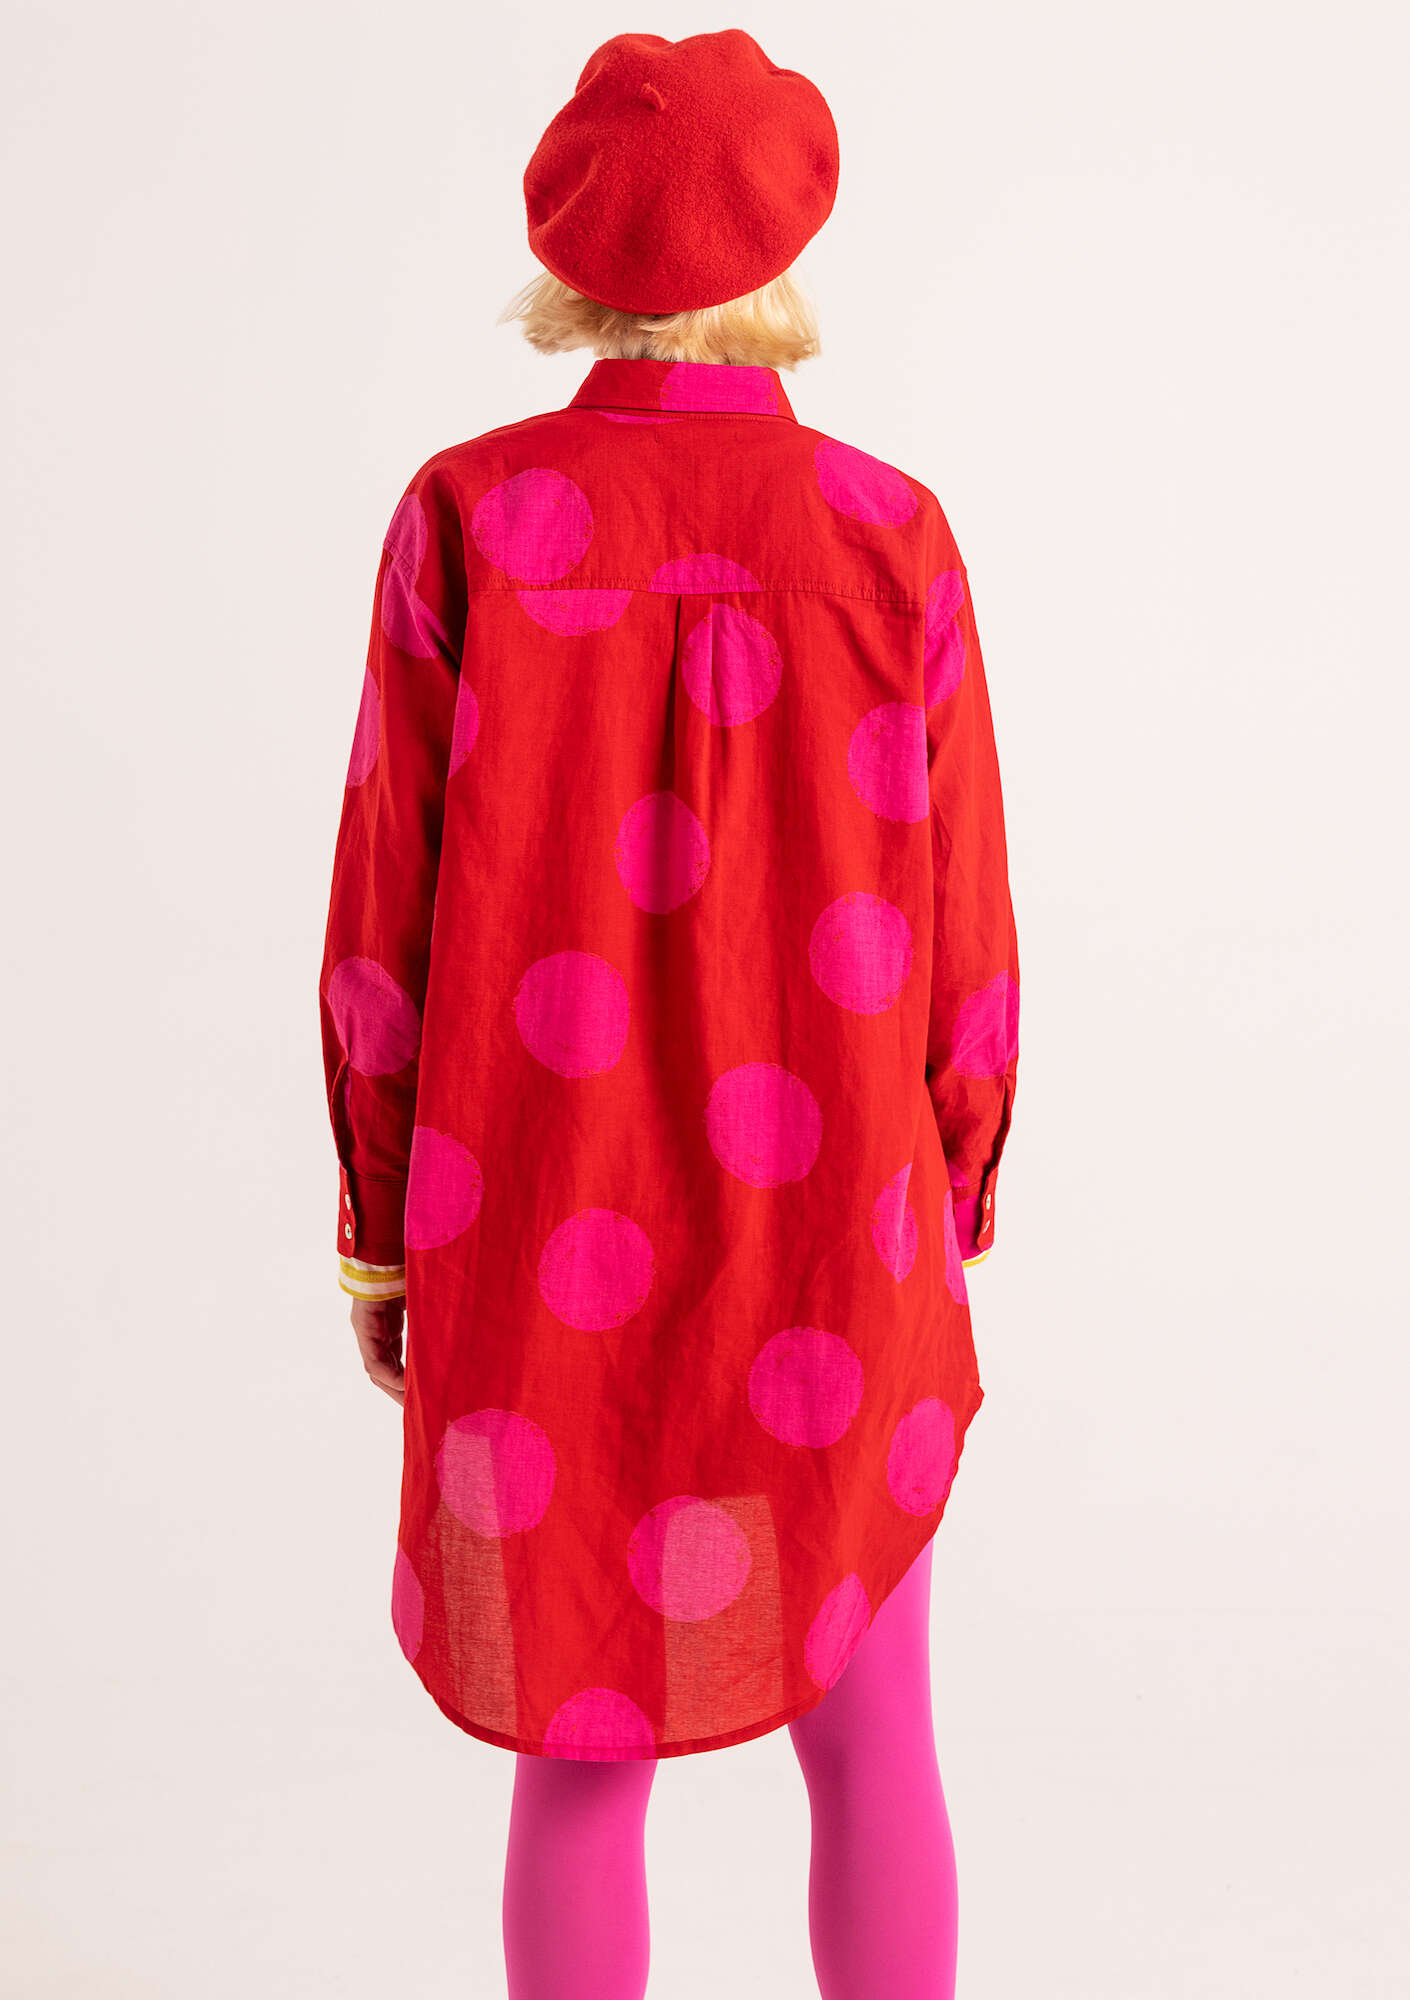 “Palette” shirt dress in organic cotton parrot red/patterned thumbnail